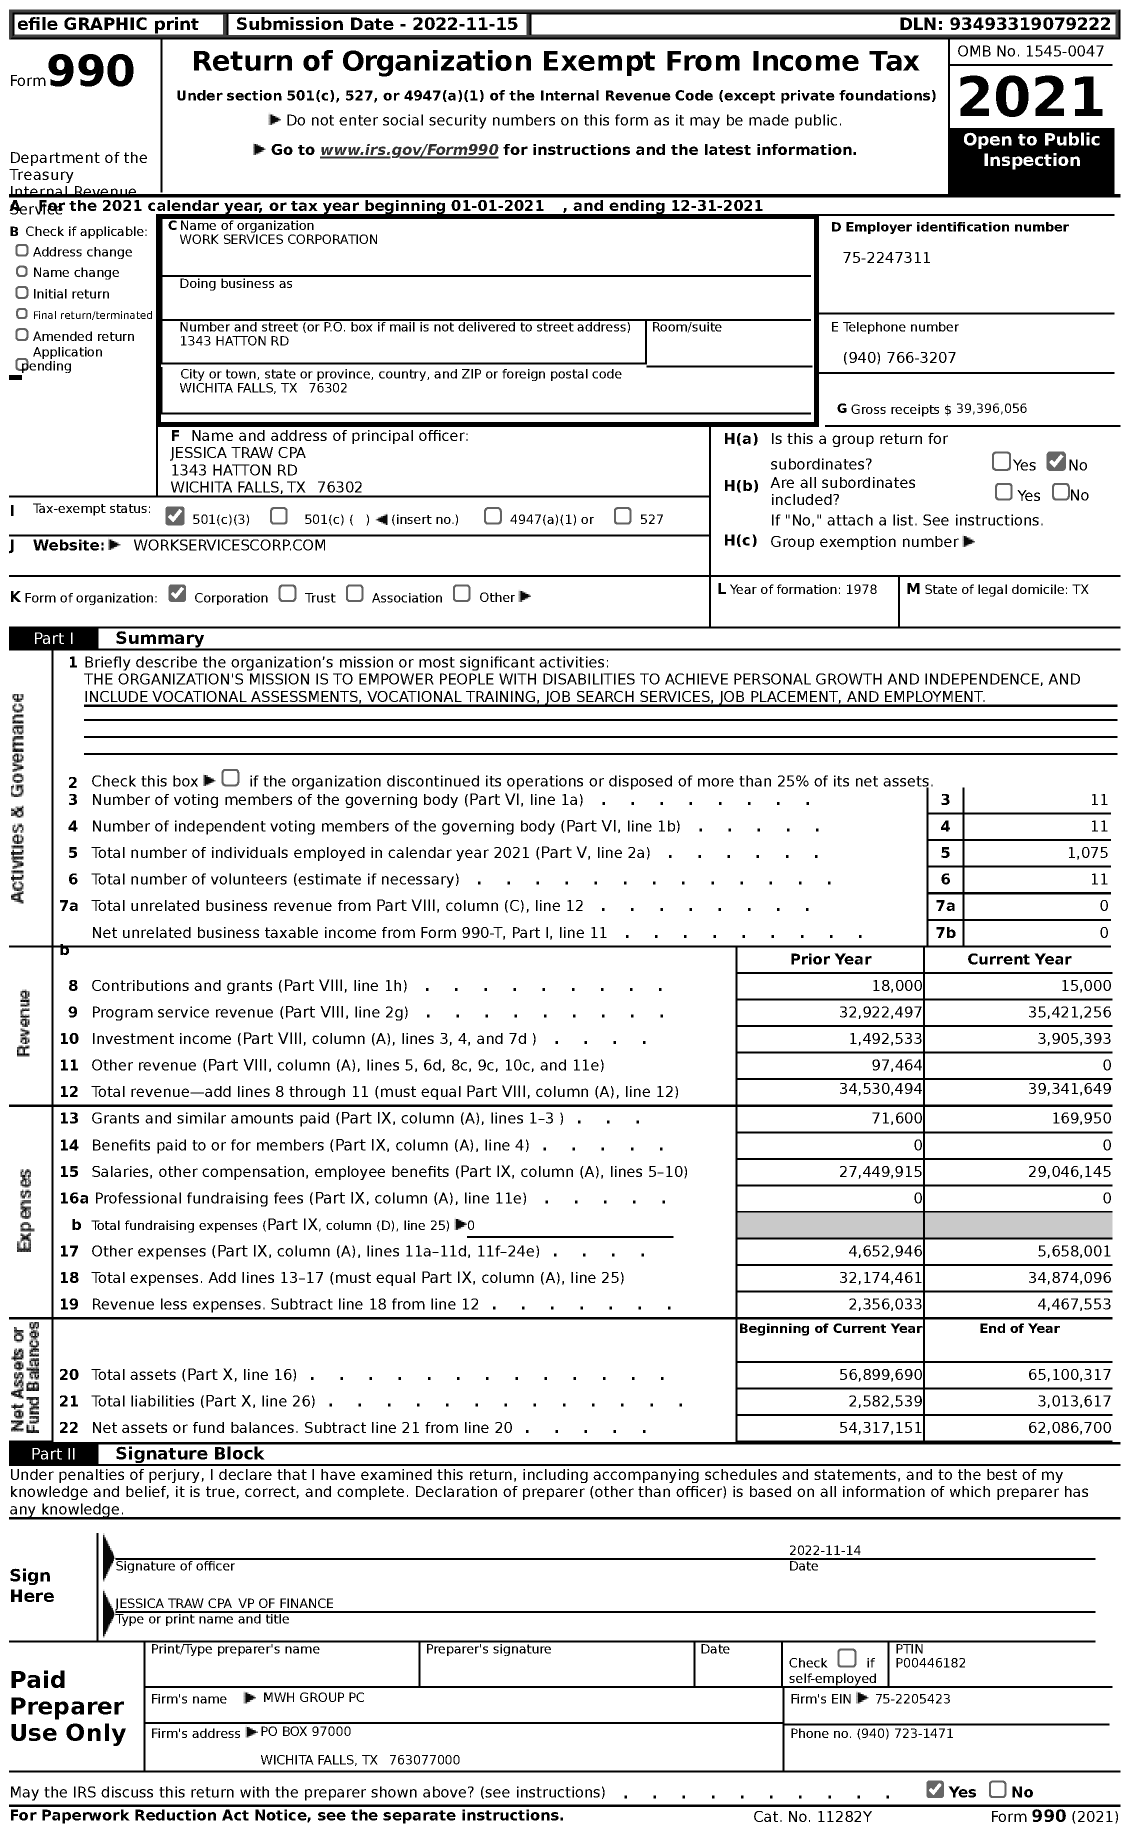 Image of first page of 2021 Form 990 for Work Services Corporation (WSC)